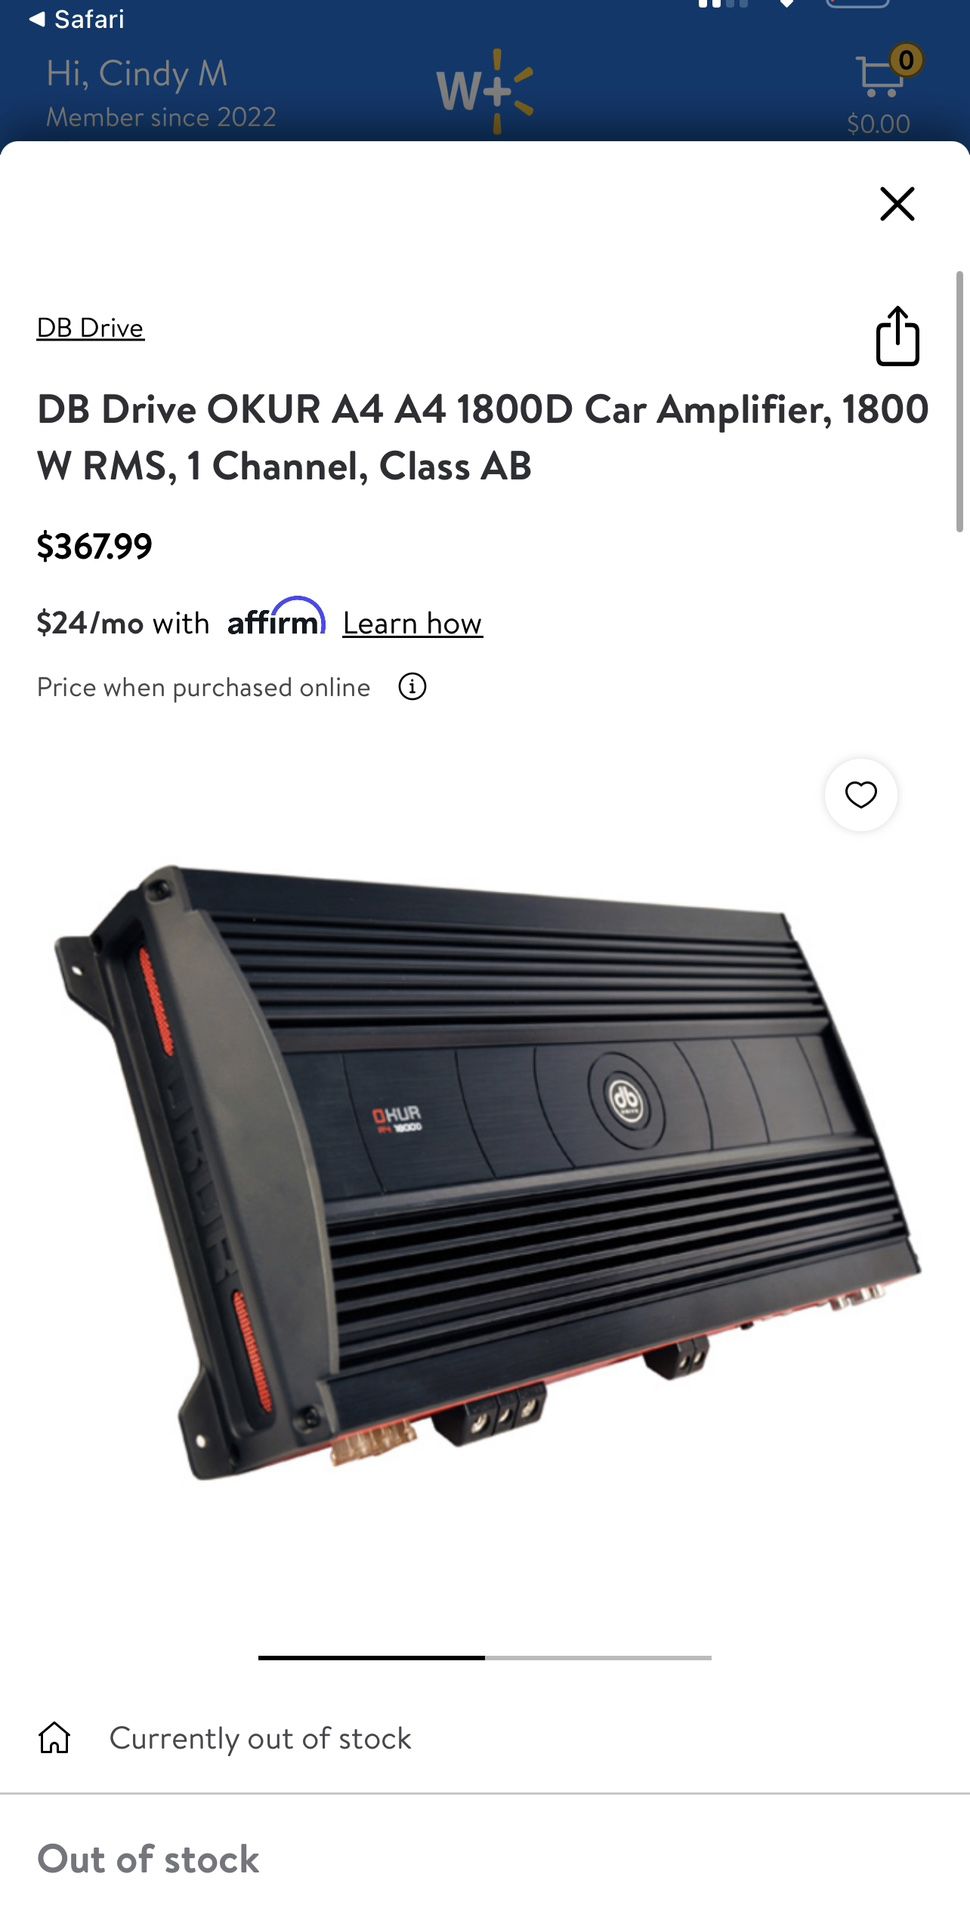 globo absceso Desde DB Drive OKUR A4 A4 1800D Car Amplifier, 1800 W RMS, 1 Channel, Class AB  for Sale in Lutz, FL - OfferUp